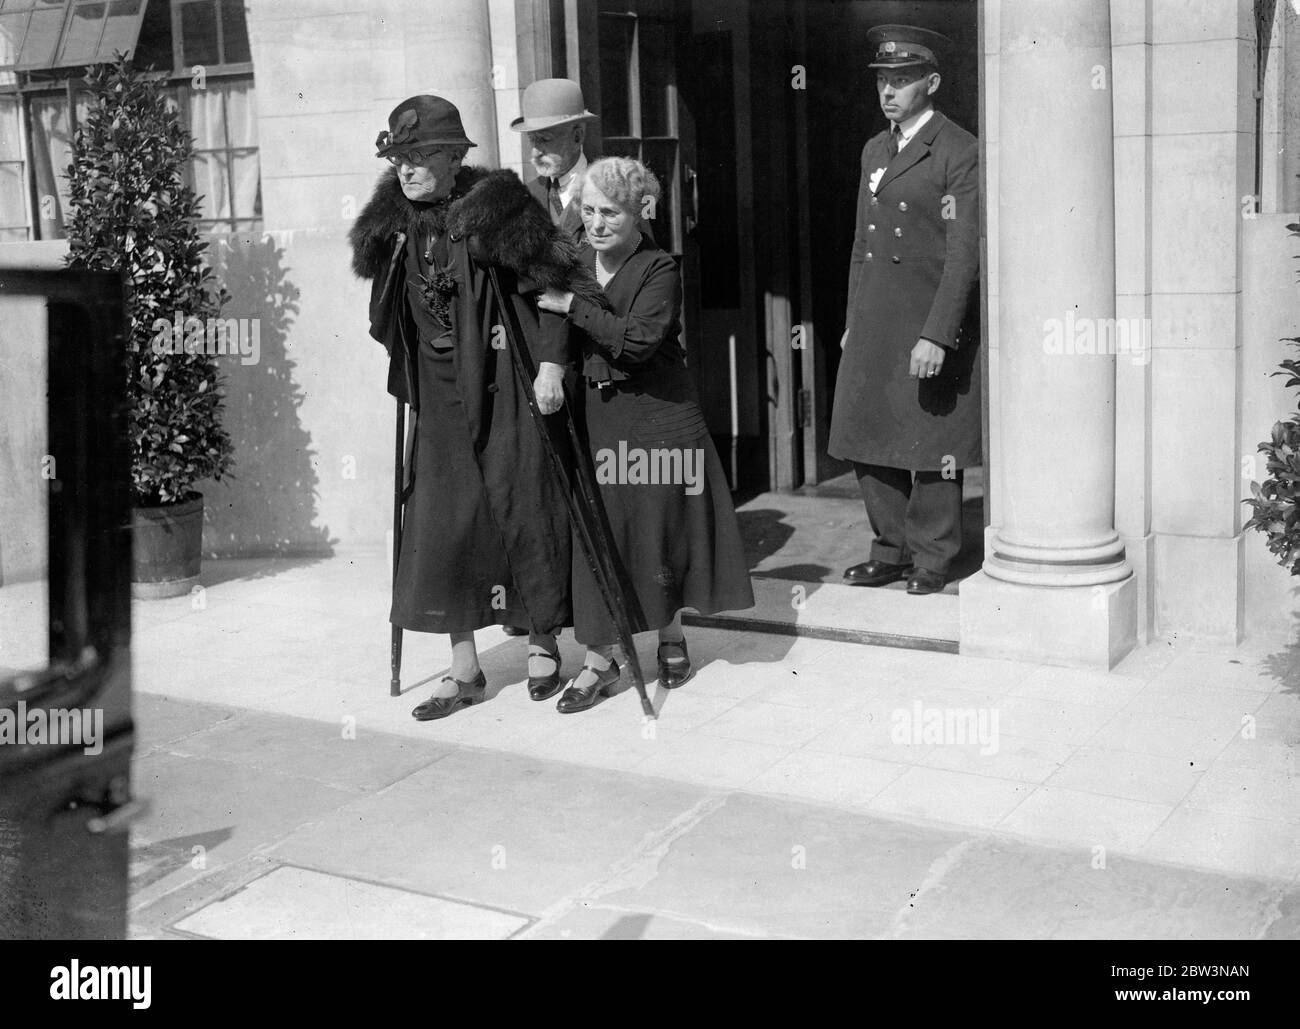 Peer of 82 weds sister in law of 81 at London Register Office . Lord Monteagle married Mrs Julia Spring Rice at Kensington Register Office . The bride being assisted from the house followed by the bridegroom as they left the register office . 11 September 1935 Stock Photo